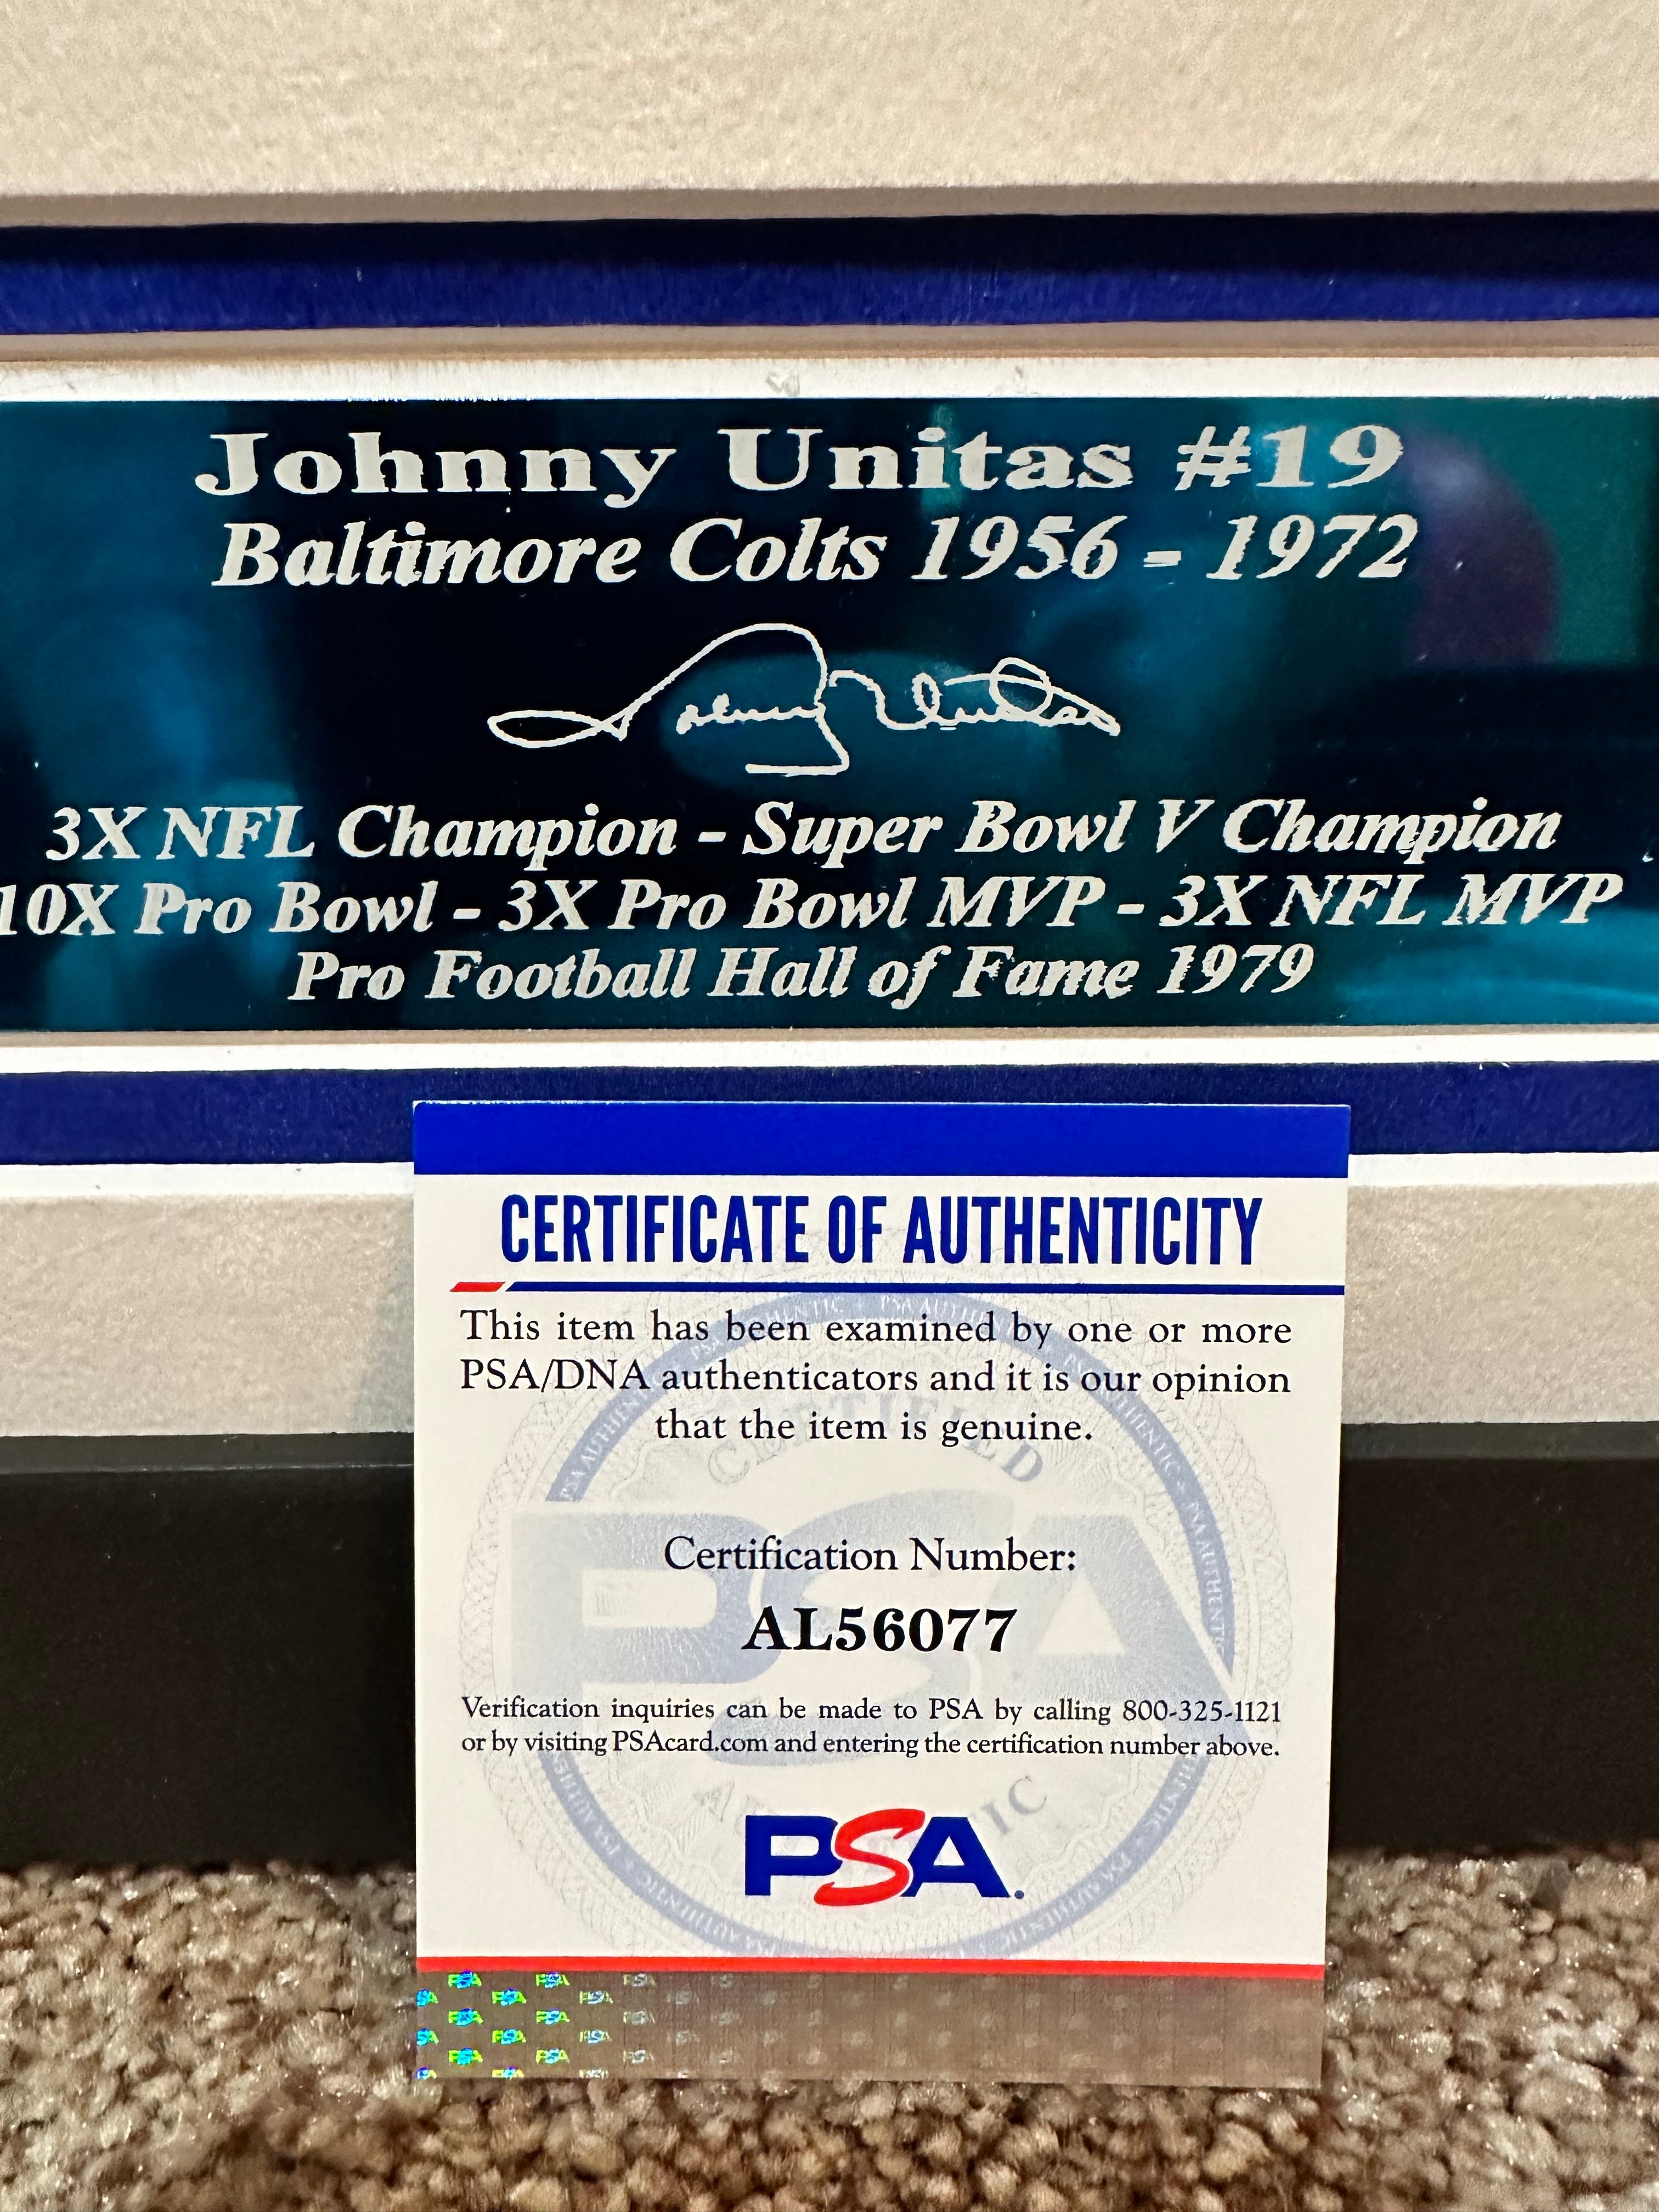 JOHNNY UNITAS AUTO SIGNED BALTIMORE/INDIANAPOLIS COLTS 8x10 FRAMED W/CARD PSA